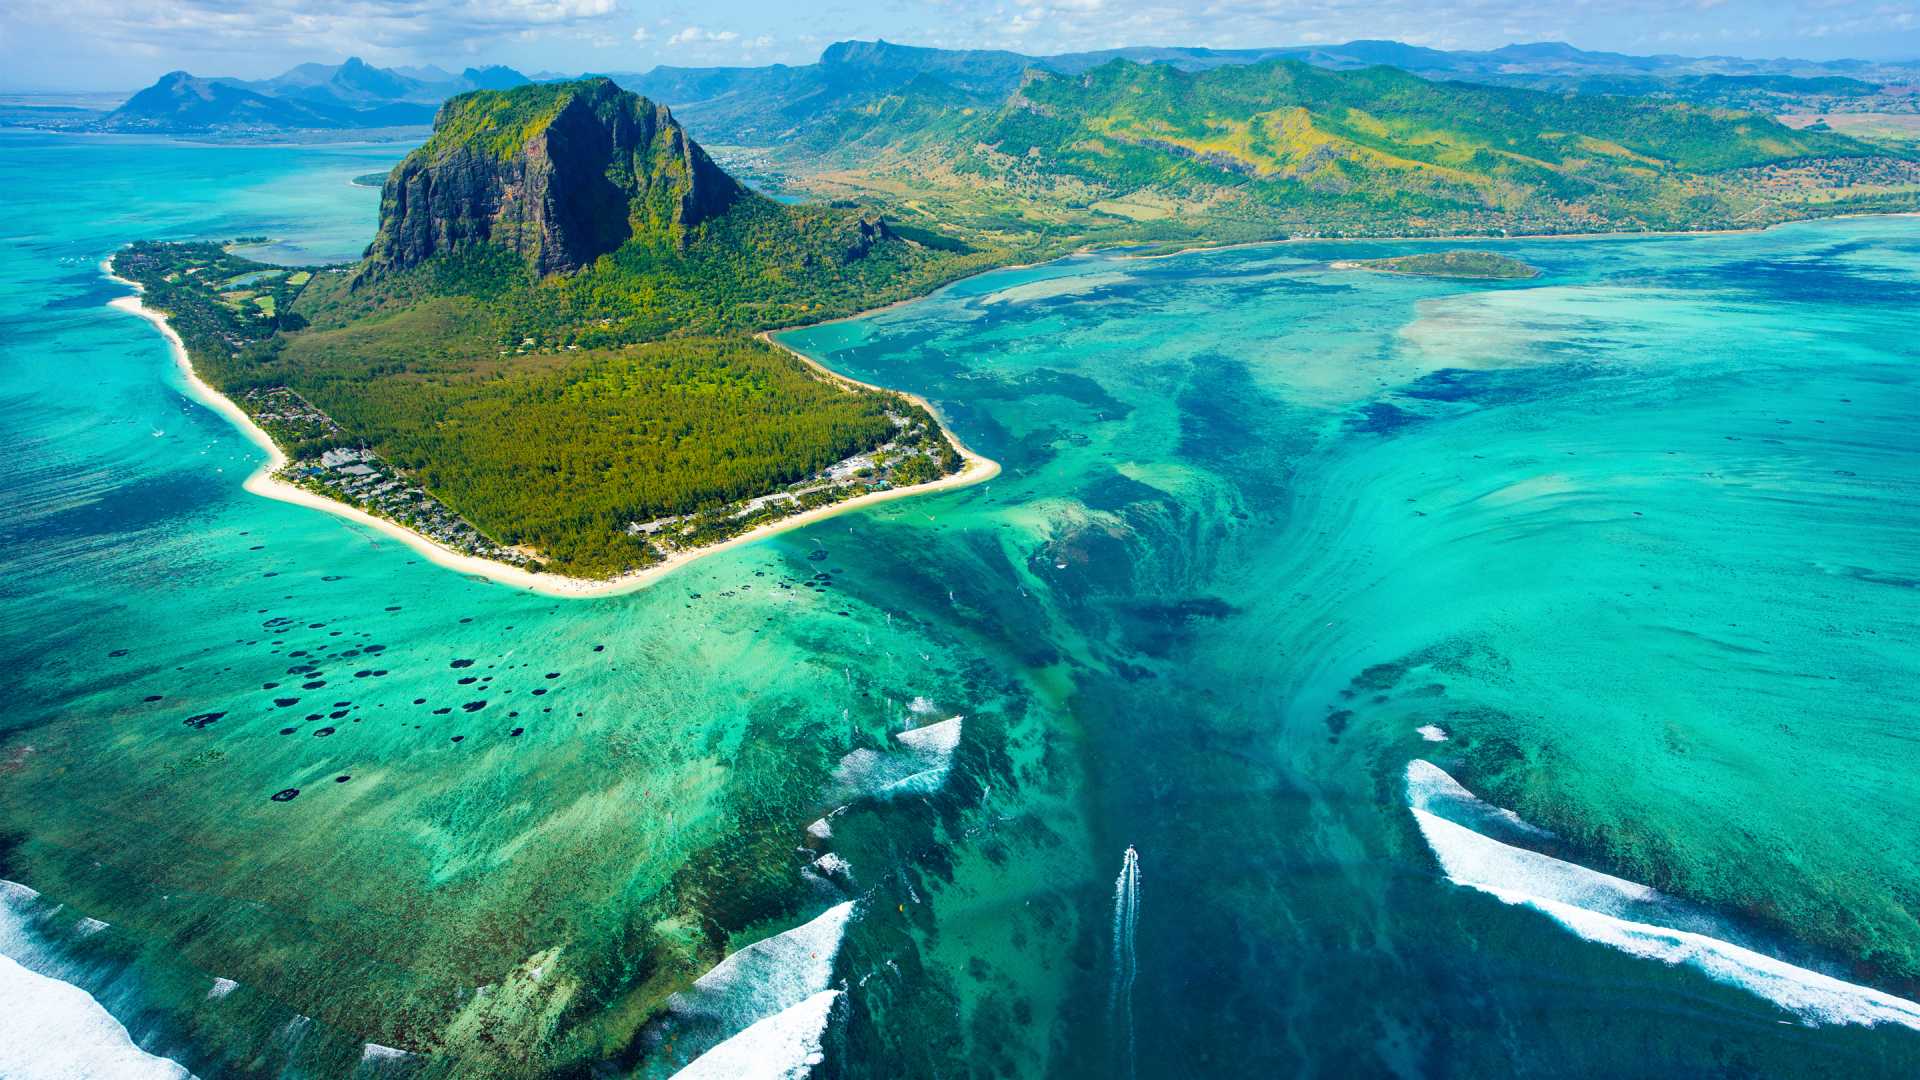 Mauritius Holidays Book For With Our Experts